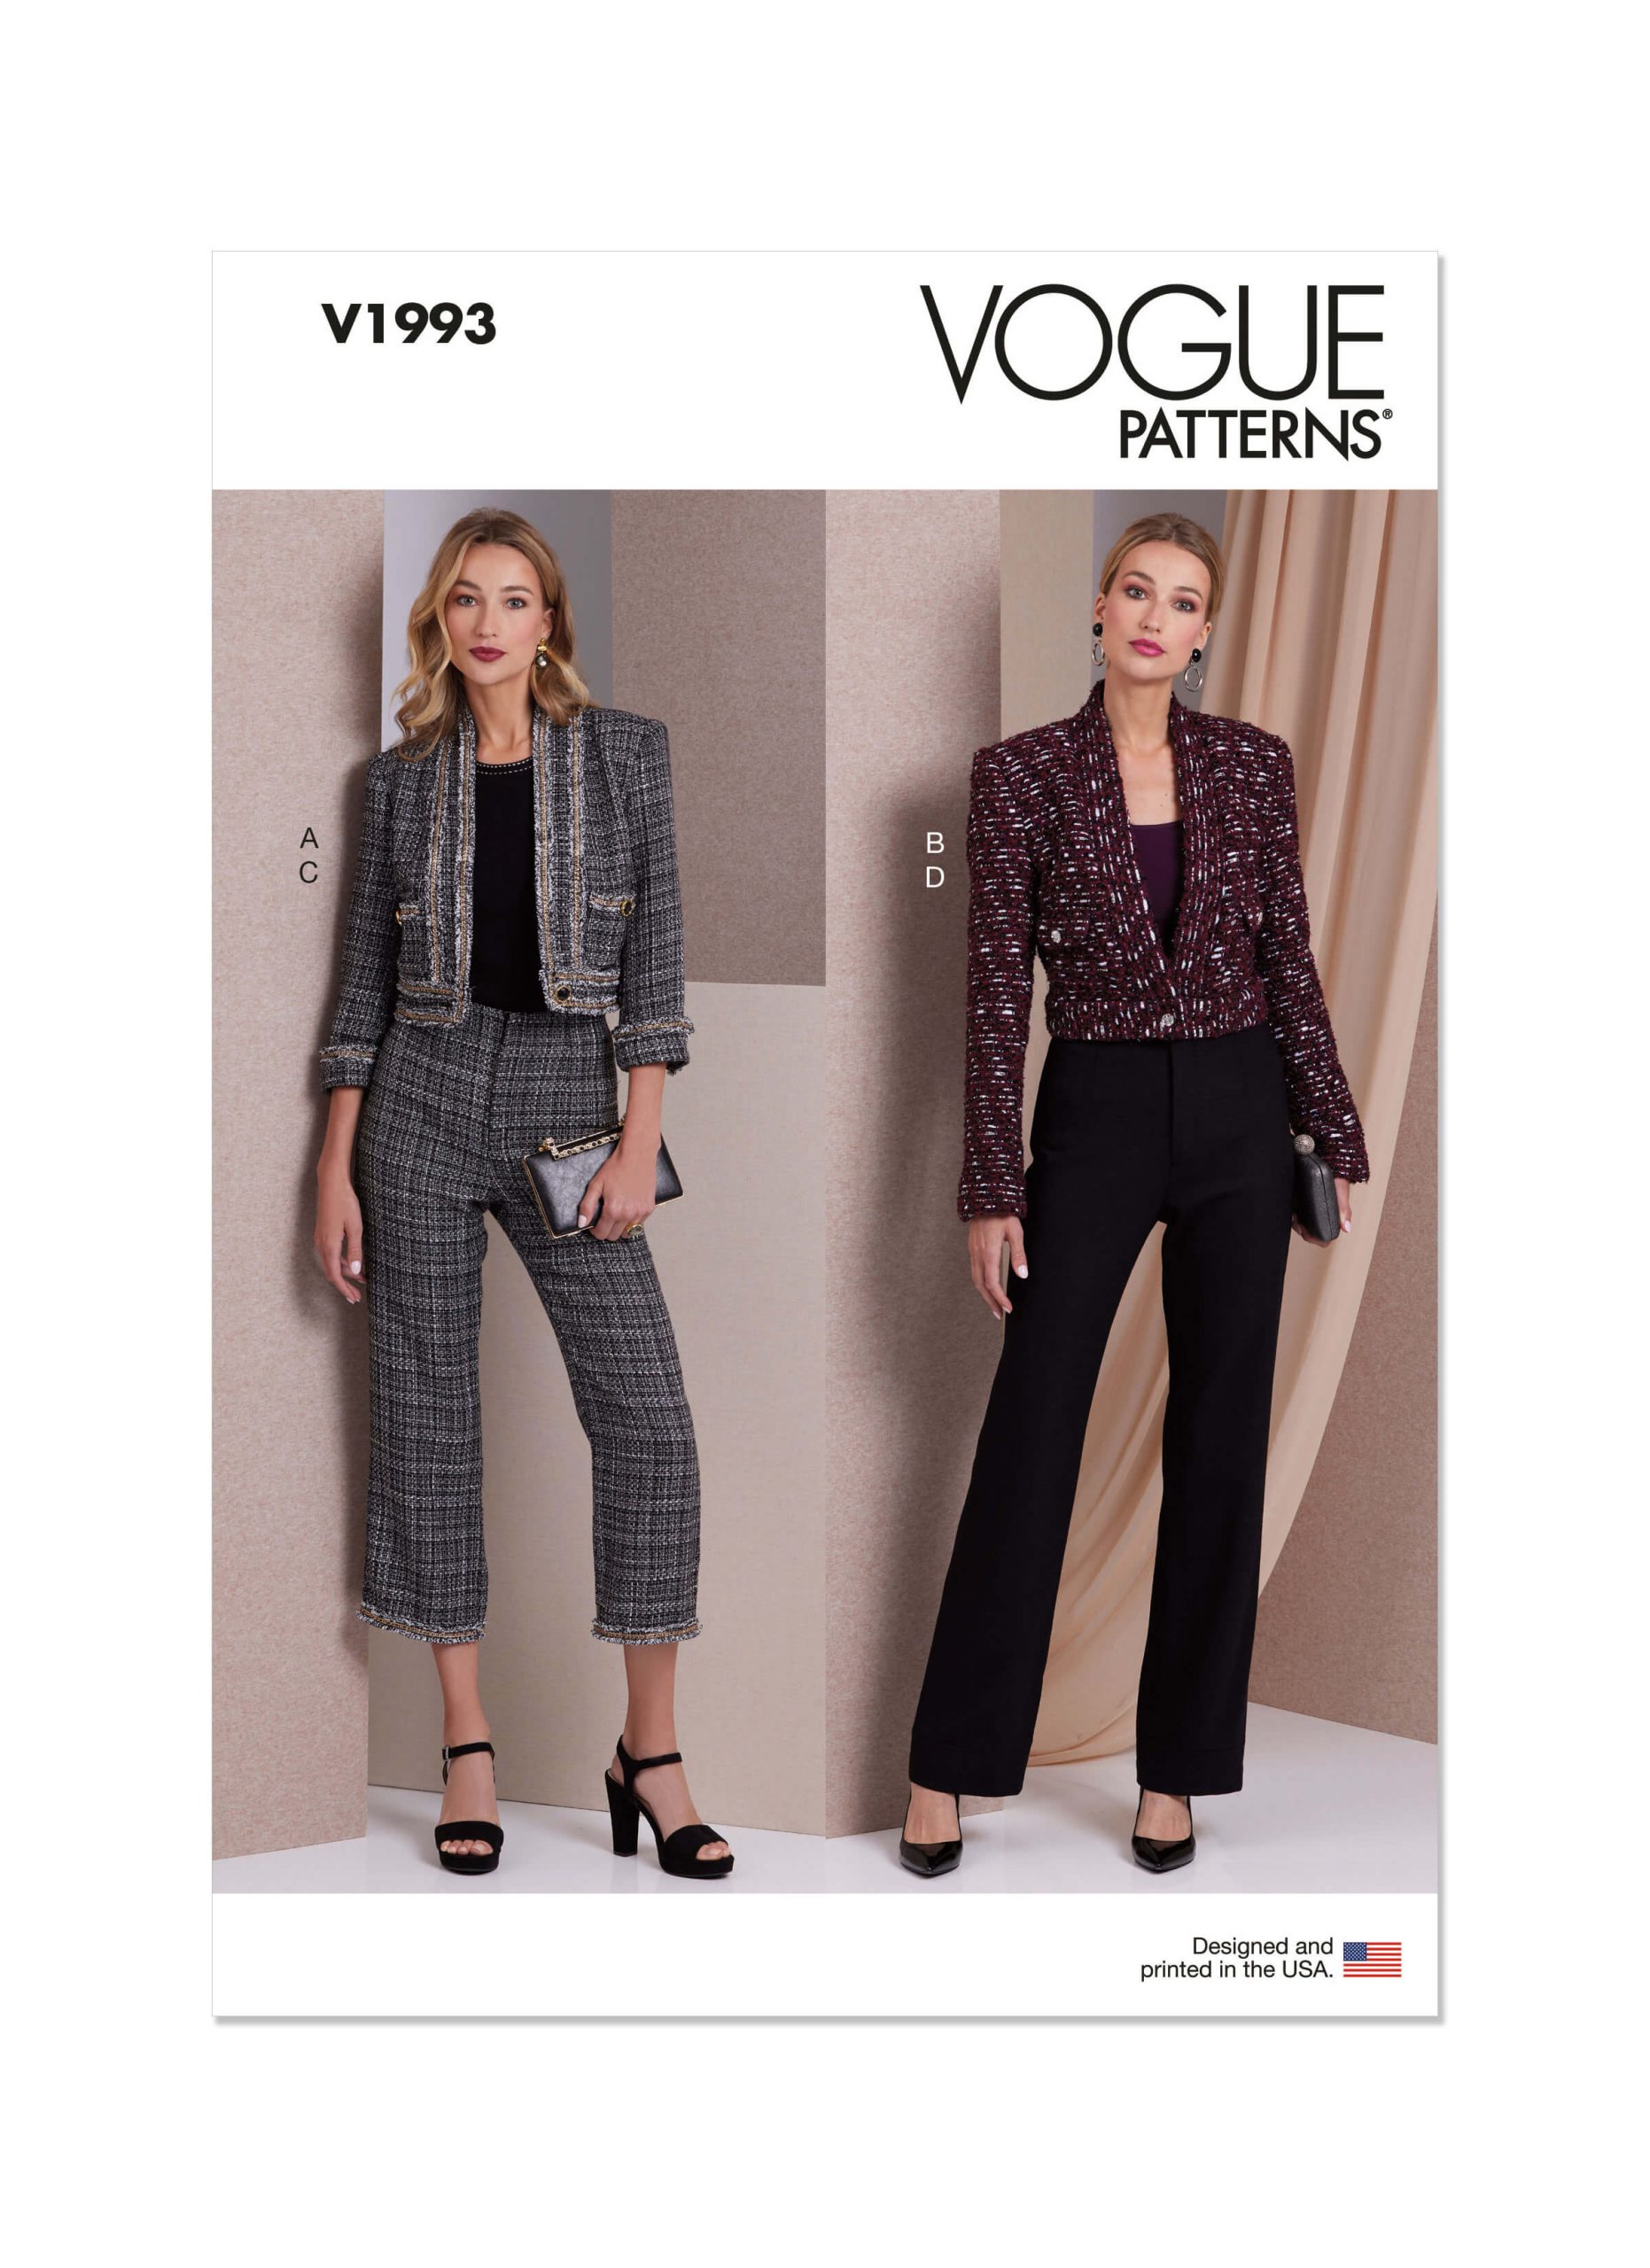 Vogue Patterns V1993 Misses' Jacket and Trousers